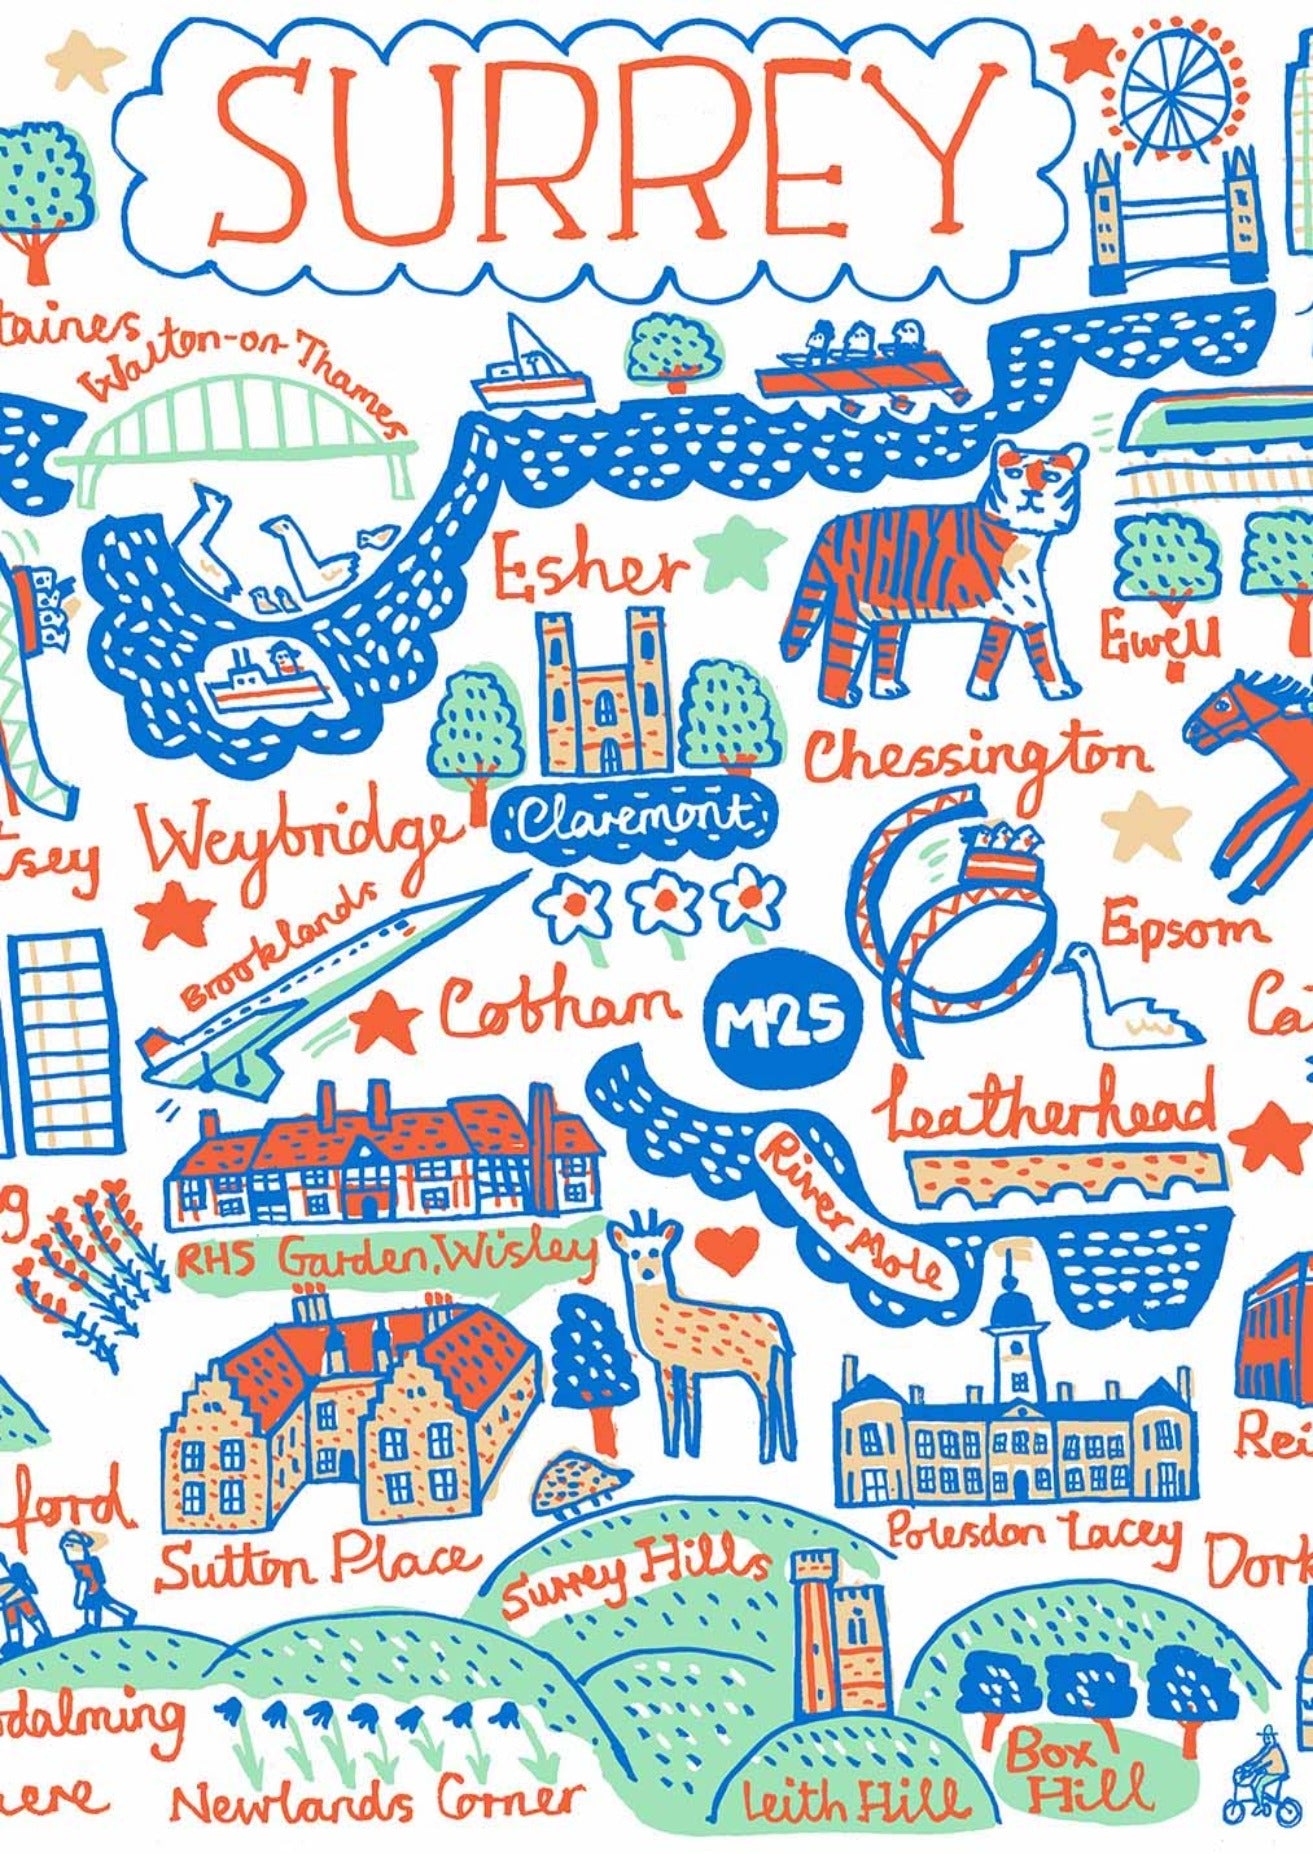 Whimsical illustration of Surrey, England, featuring Woking, Guilford, Weybridge, Redhill. Camberley and London, illustrated by British travel artist Julia Gash